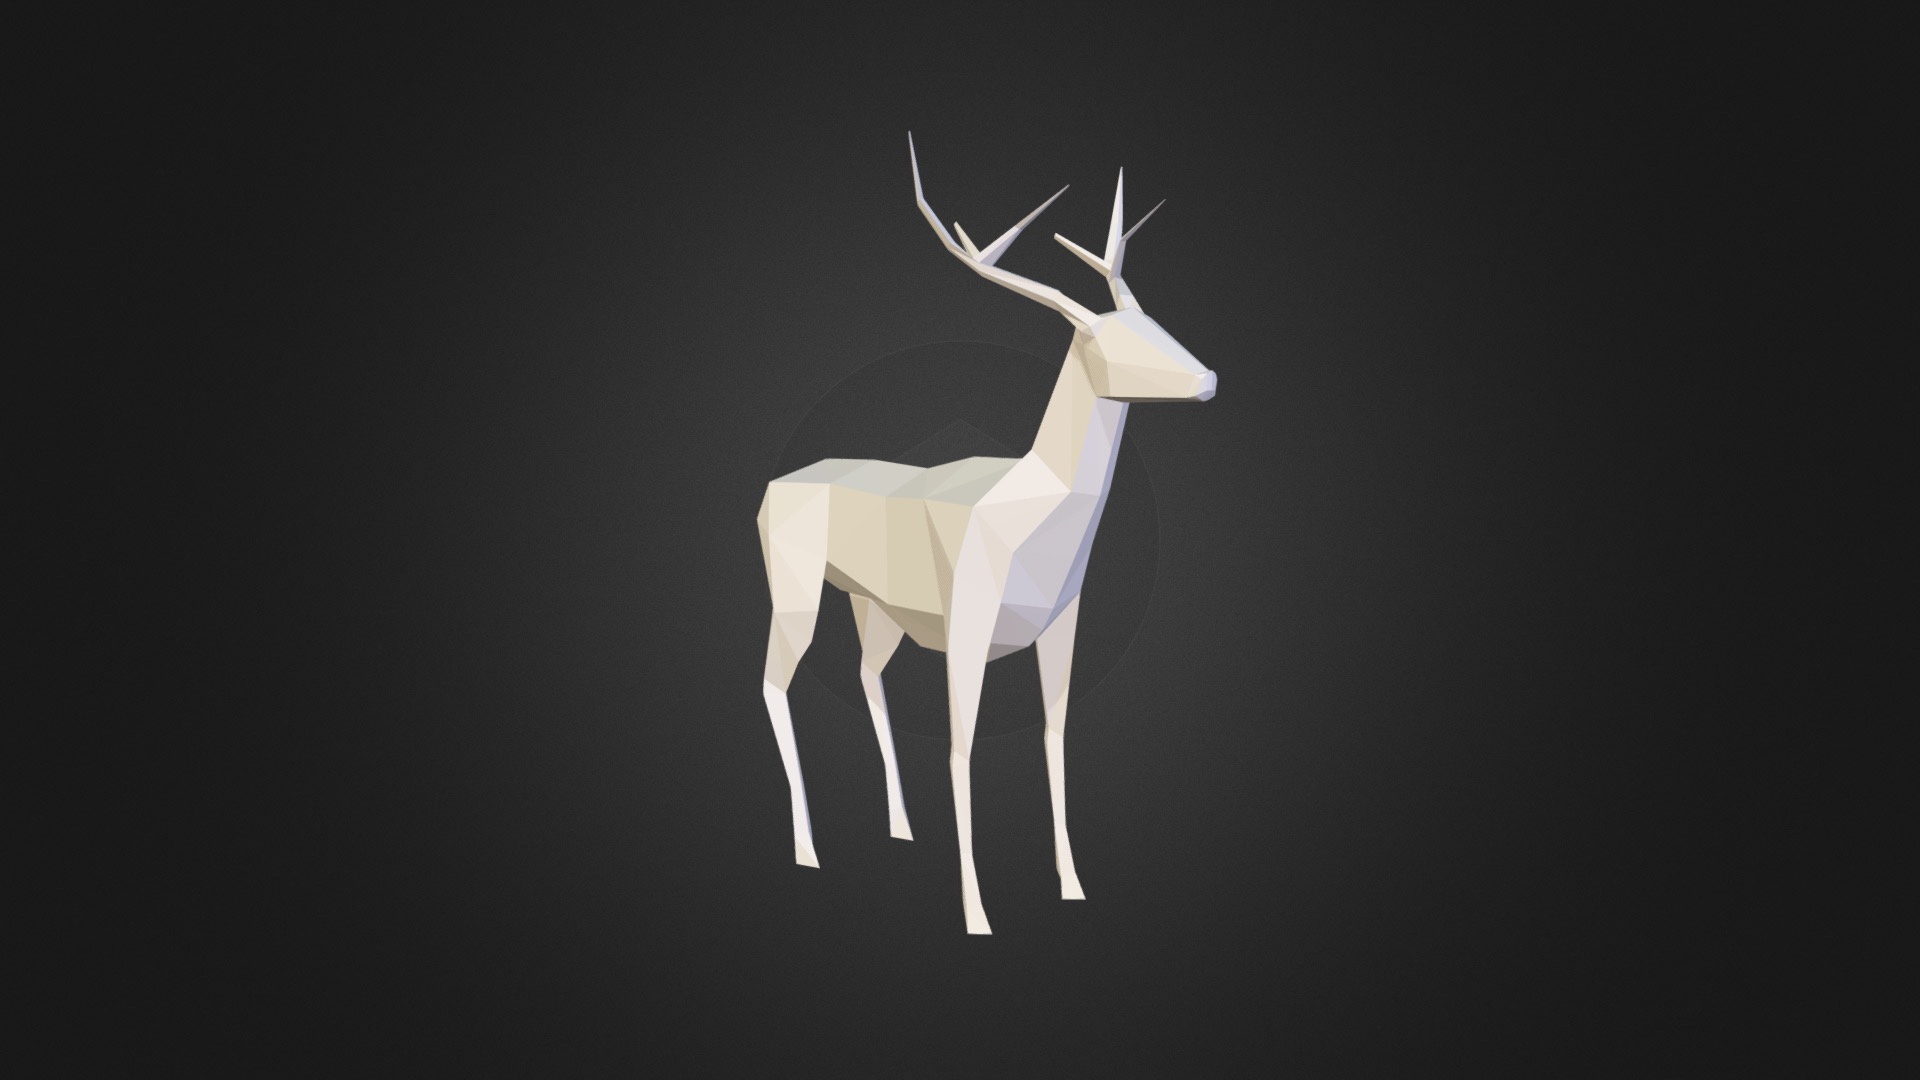 3D model Deer - This is a 3D model of the Deer. The 3D model is about a white moose with antlers.